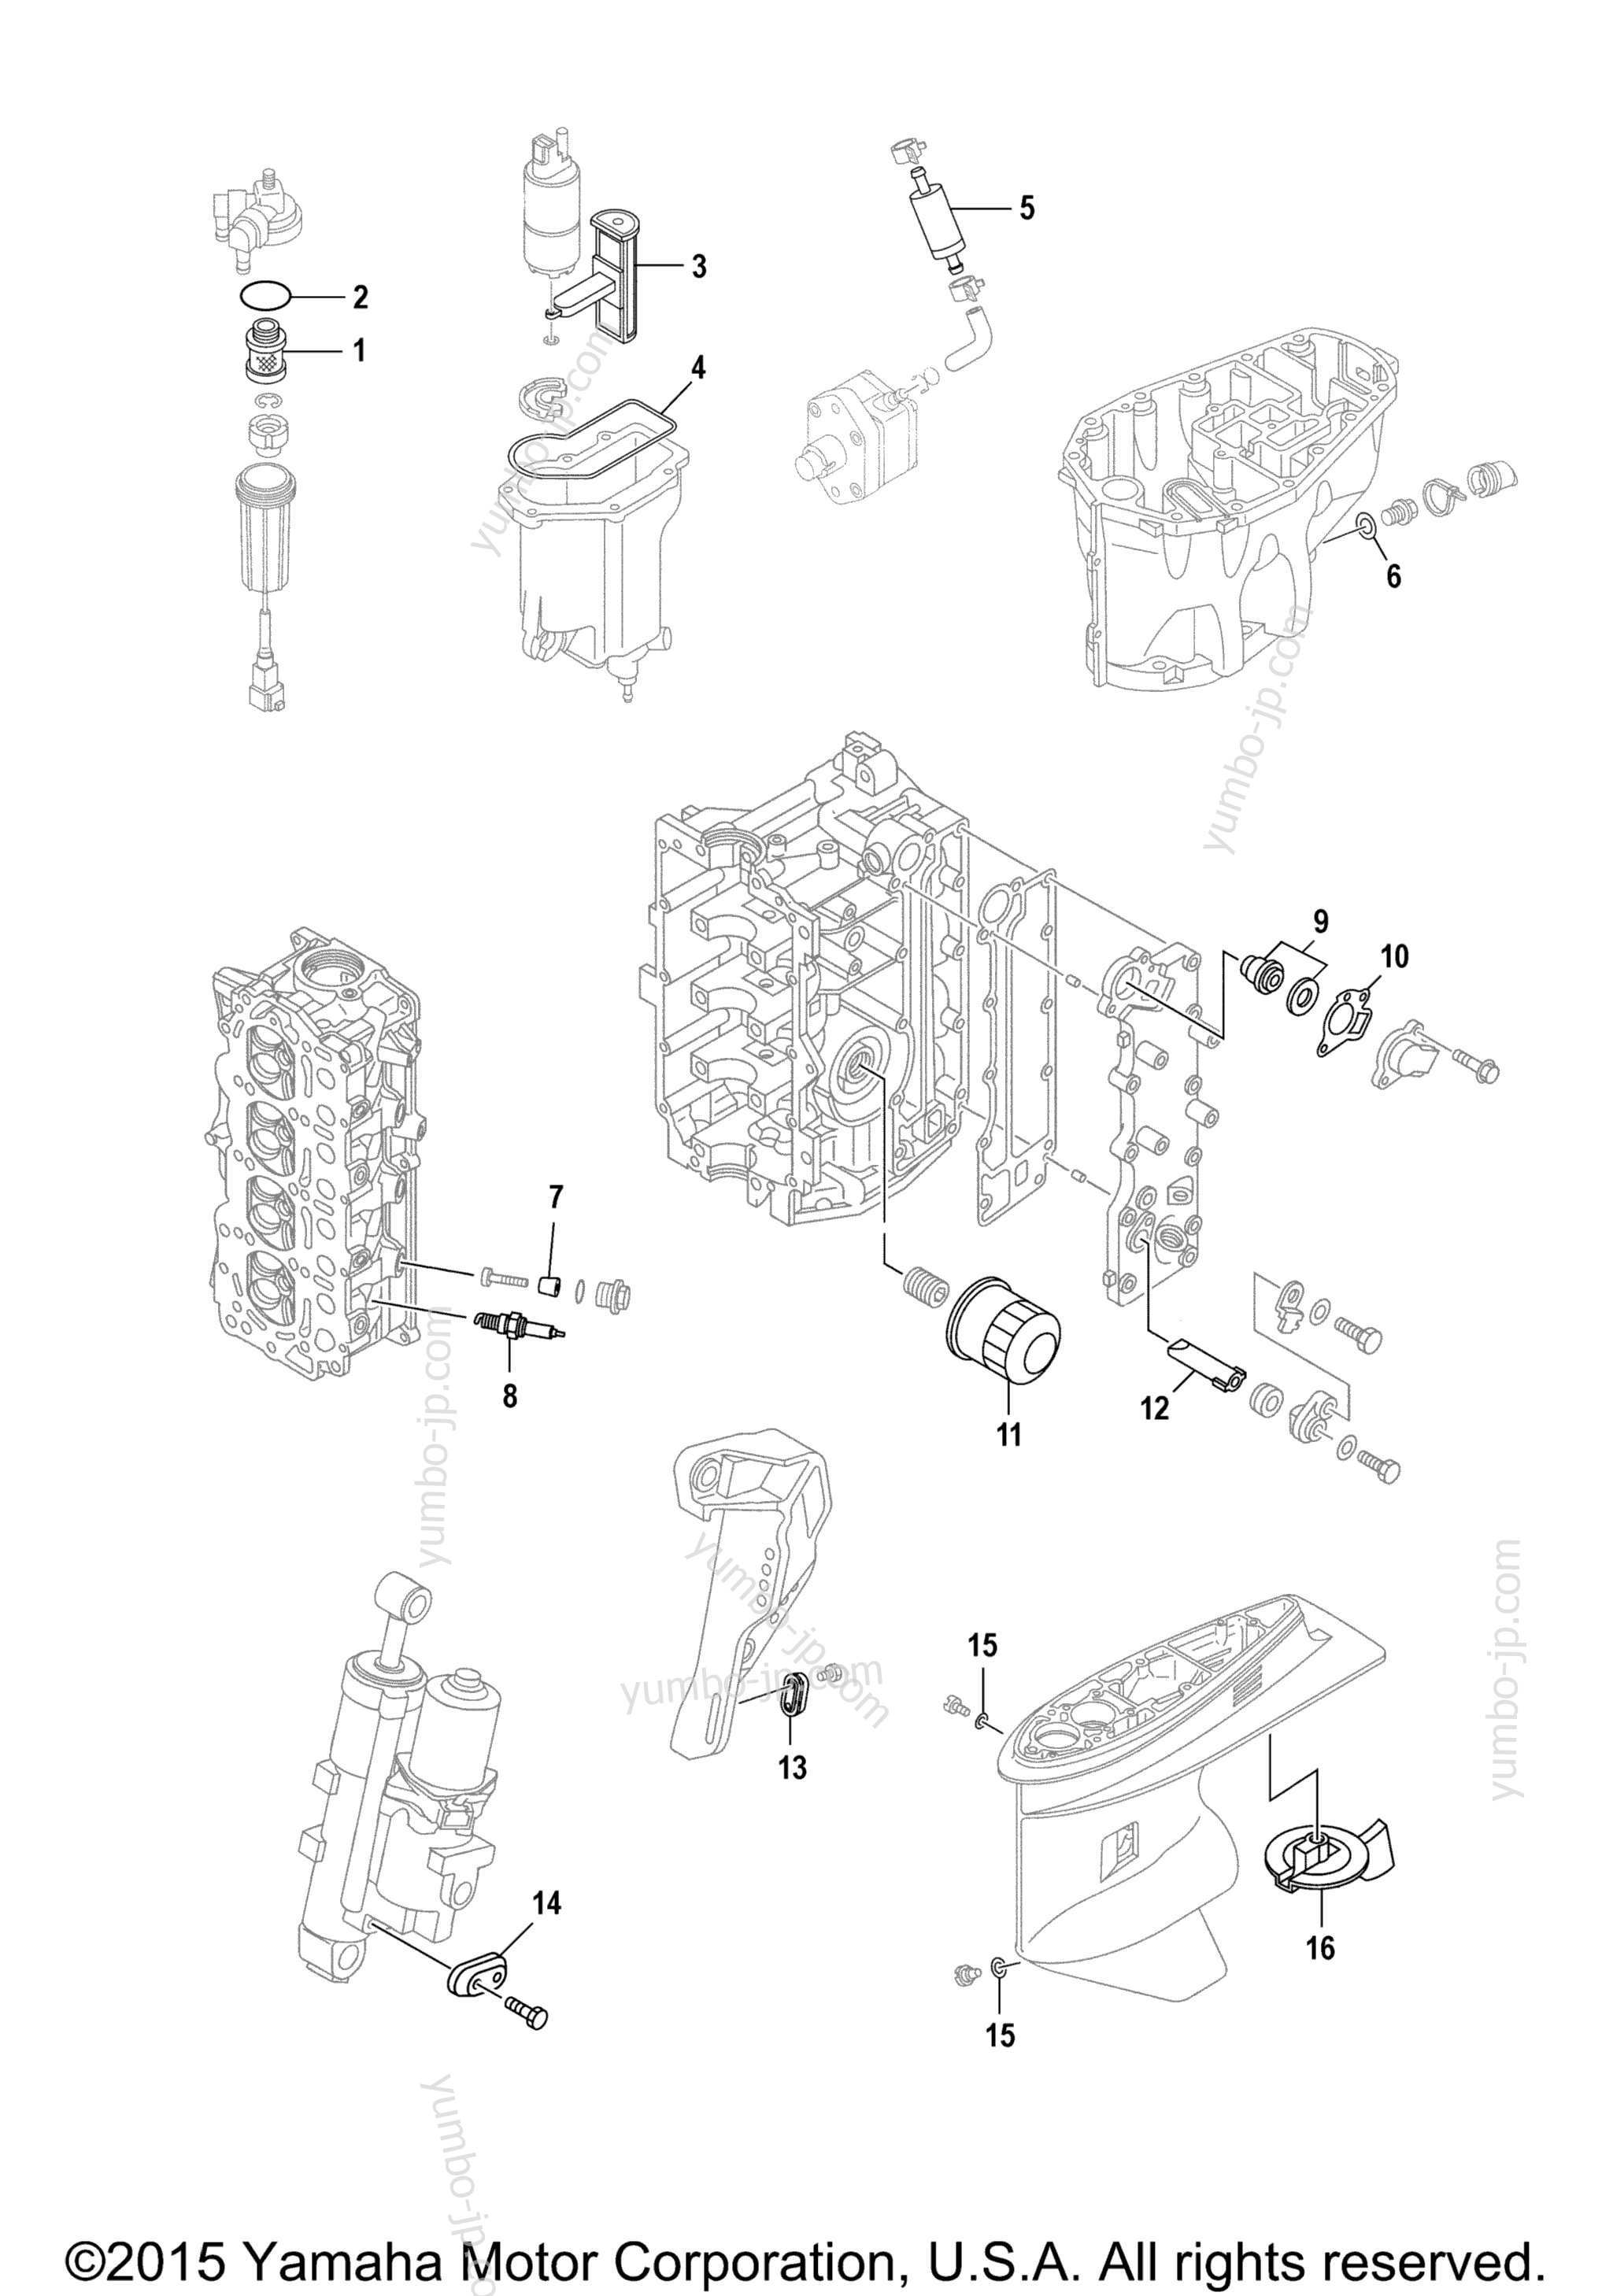 Scheduled Service Parts for outboards YAMAHA F70LA_0411 (0411) 2006 year